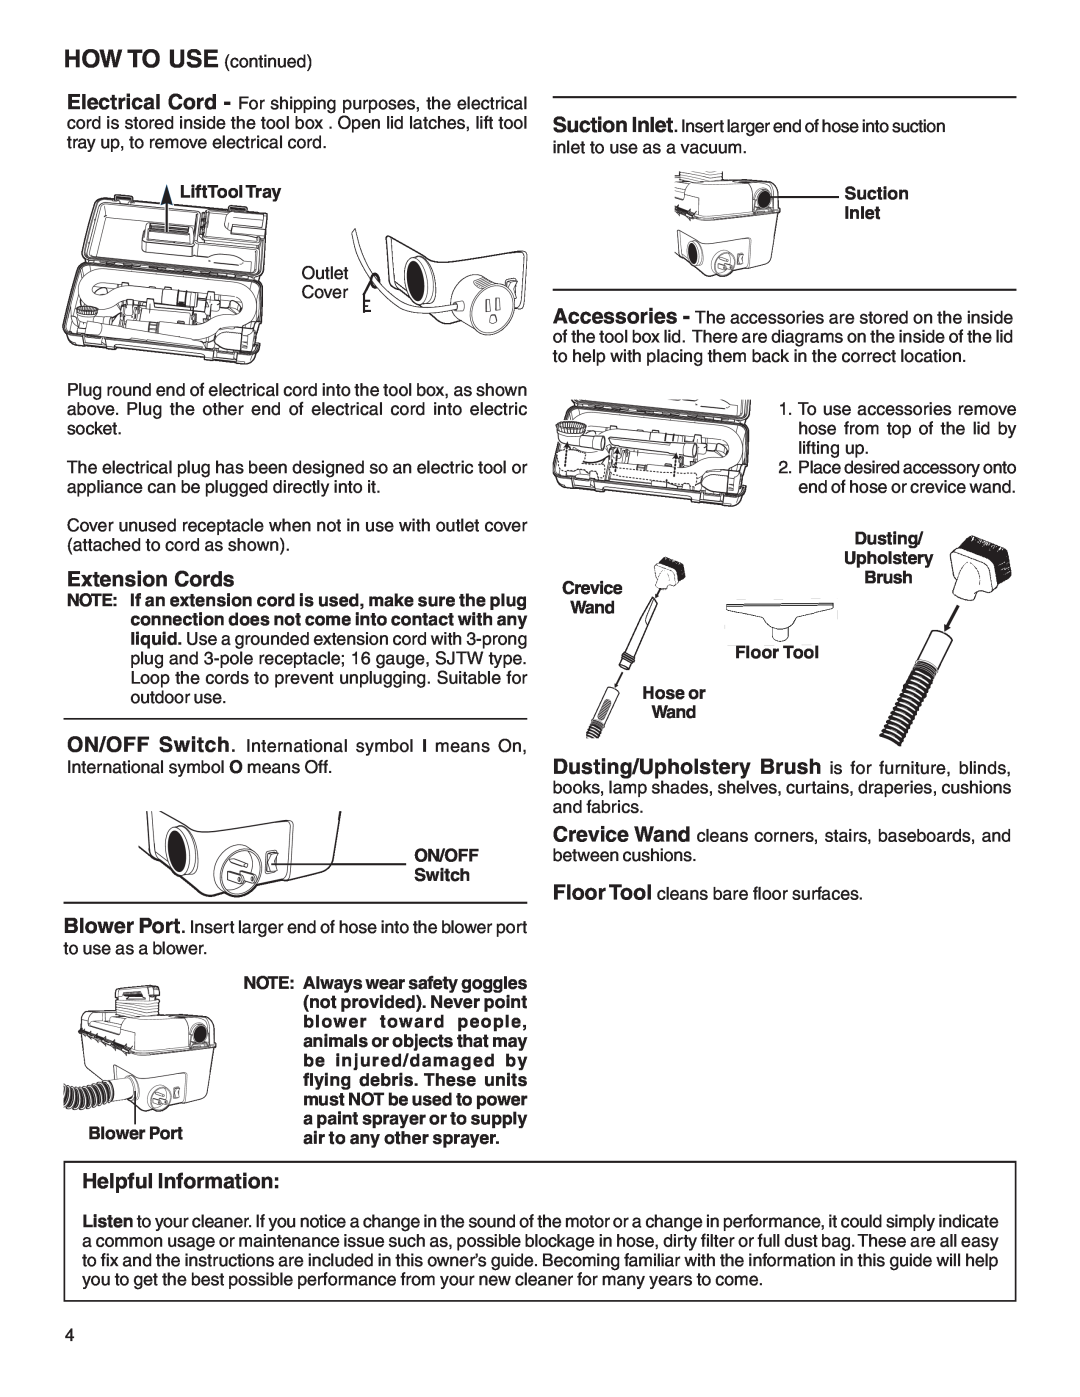 Sanitaire 1040 warranty HOW TO USE continued, Extension Cords, Helpful Information 